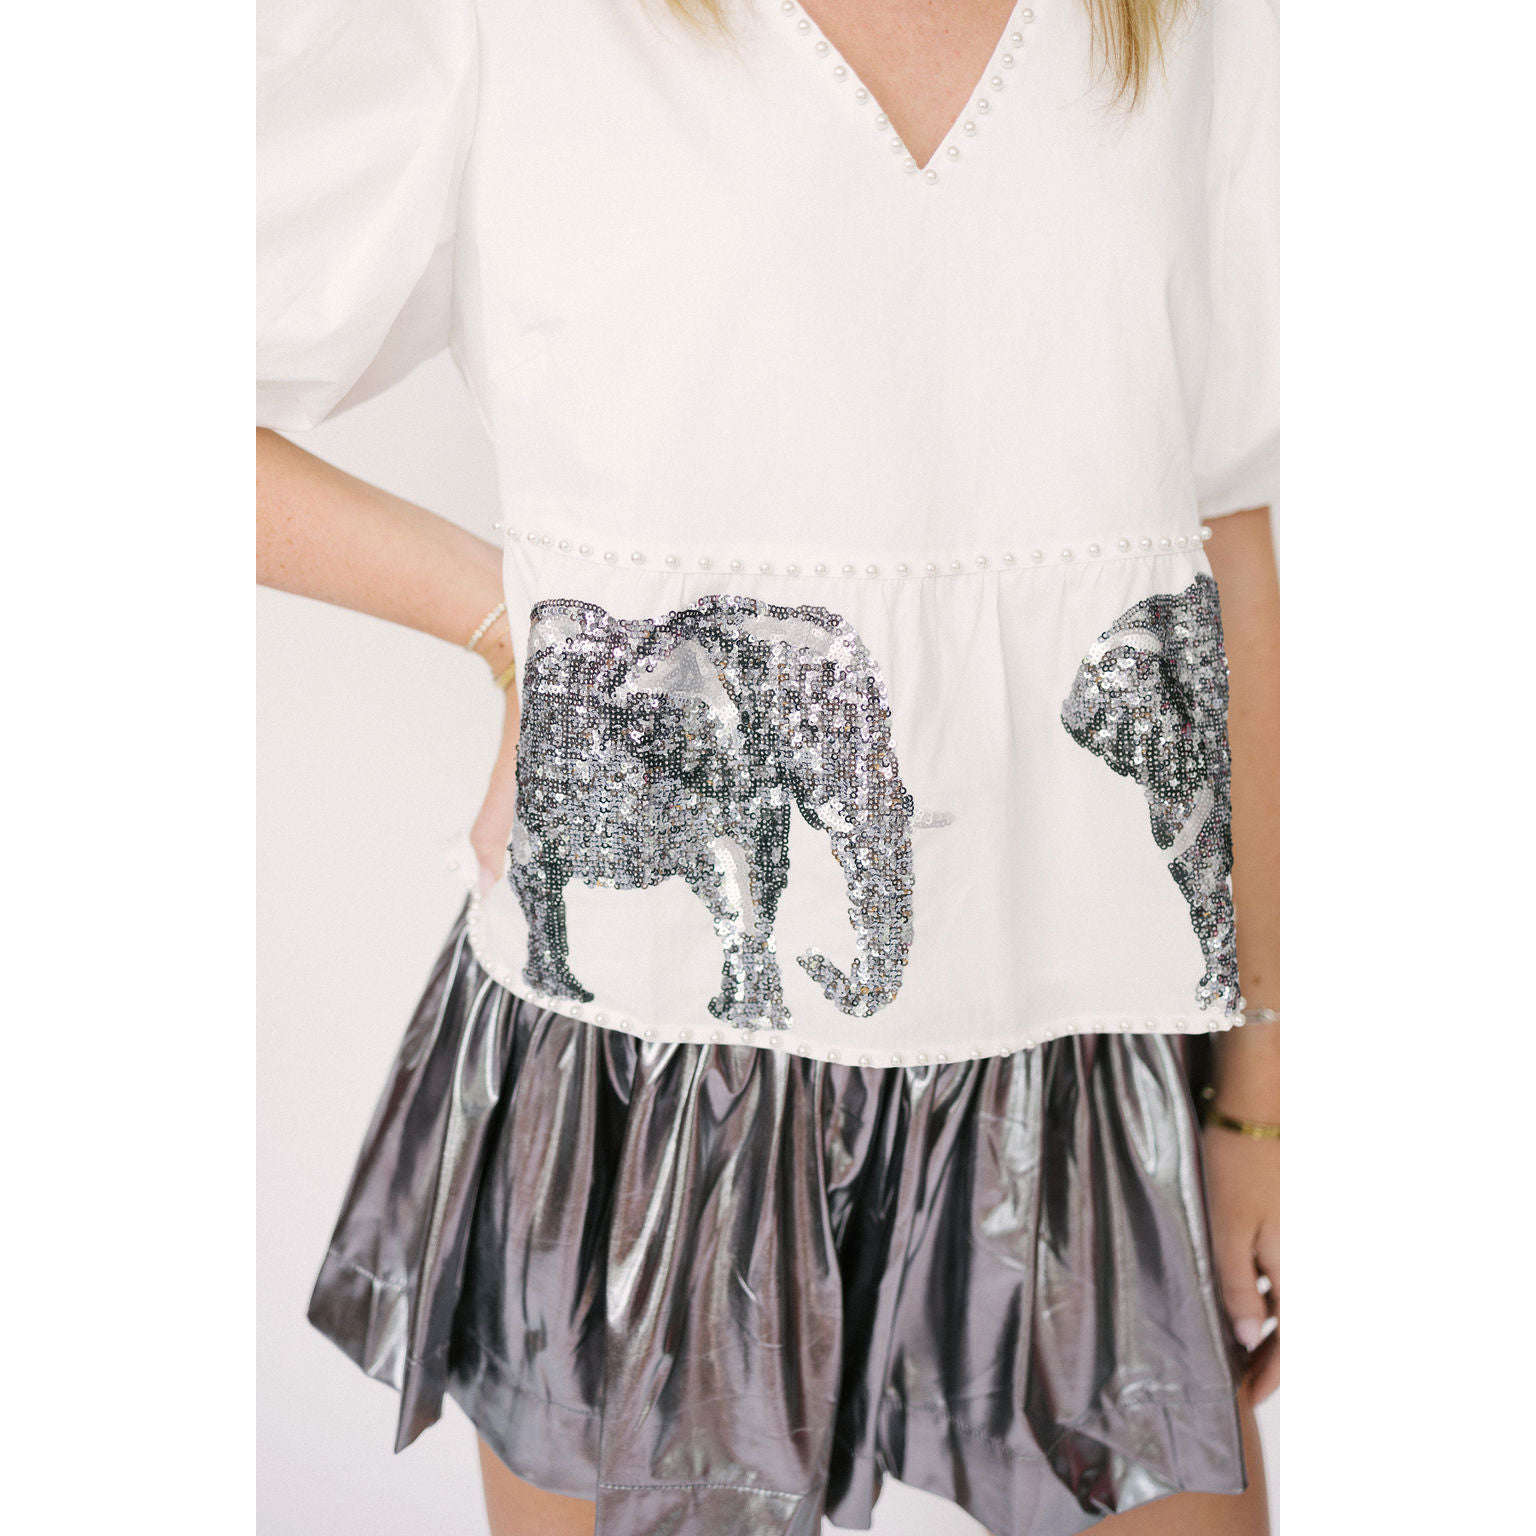 8.28 Boutique:Queen of Sparkles,Queen of Sparkles Peplum Poof Sleeve Top with Elephants,Shirts & Tops